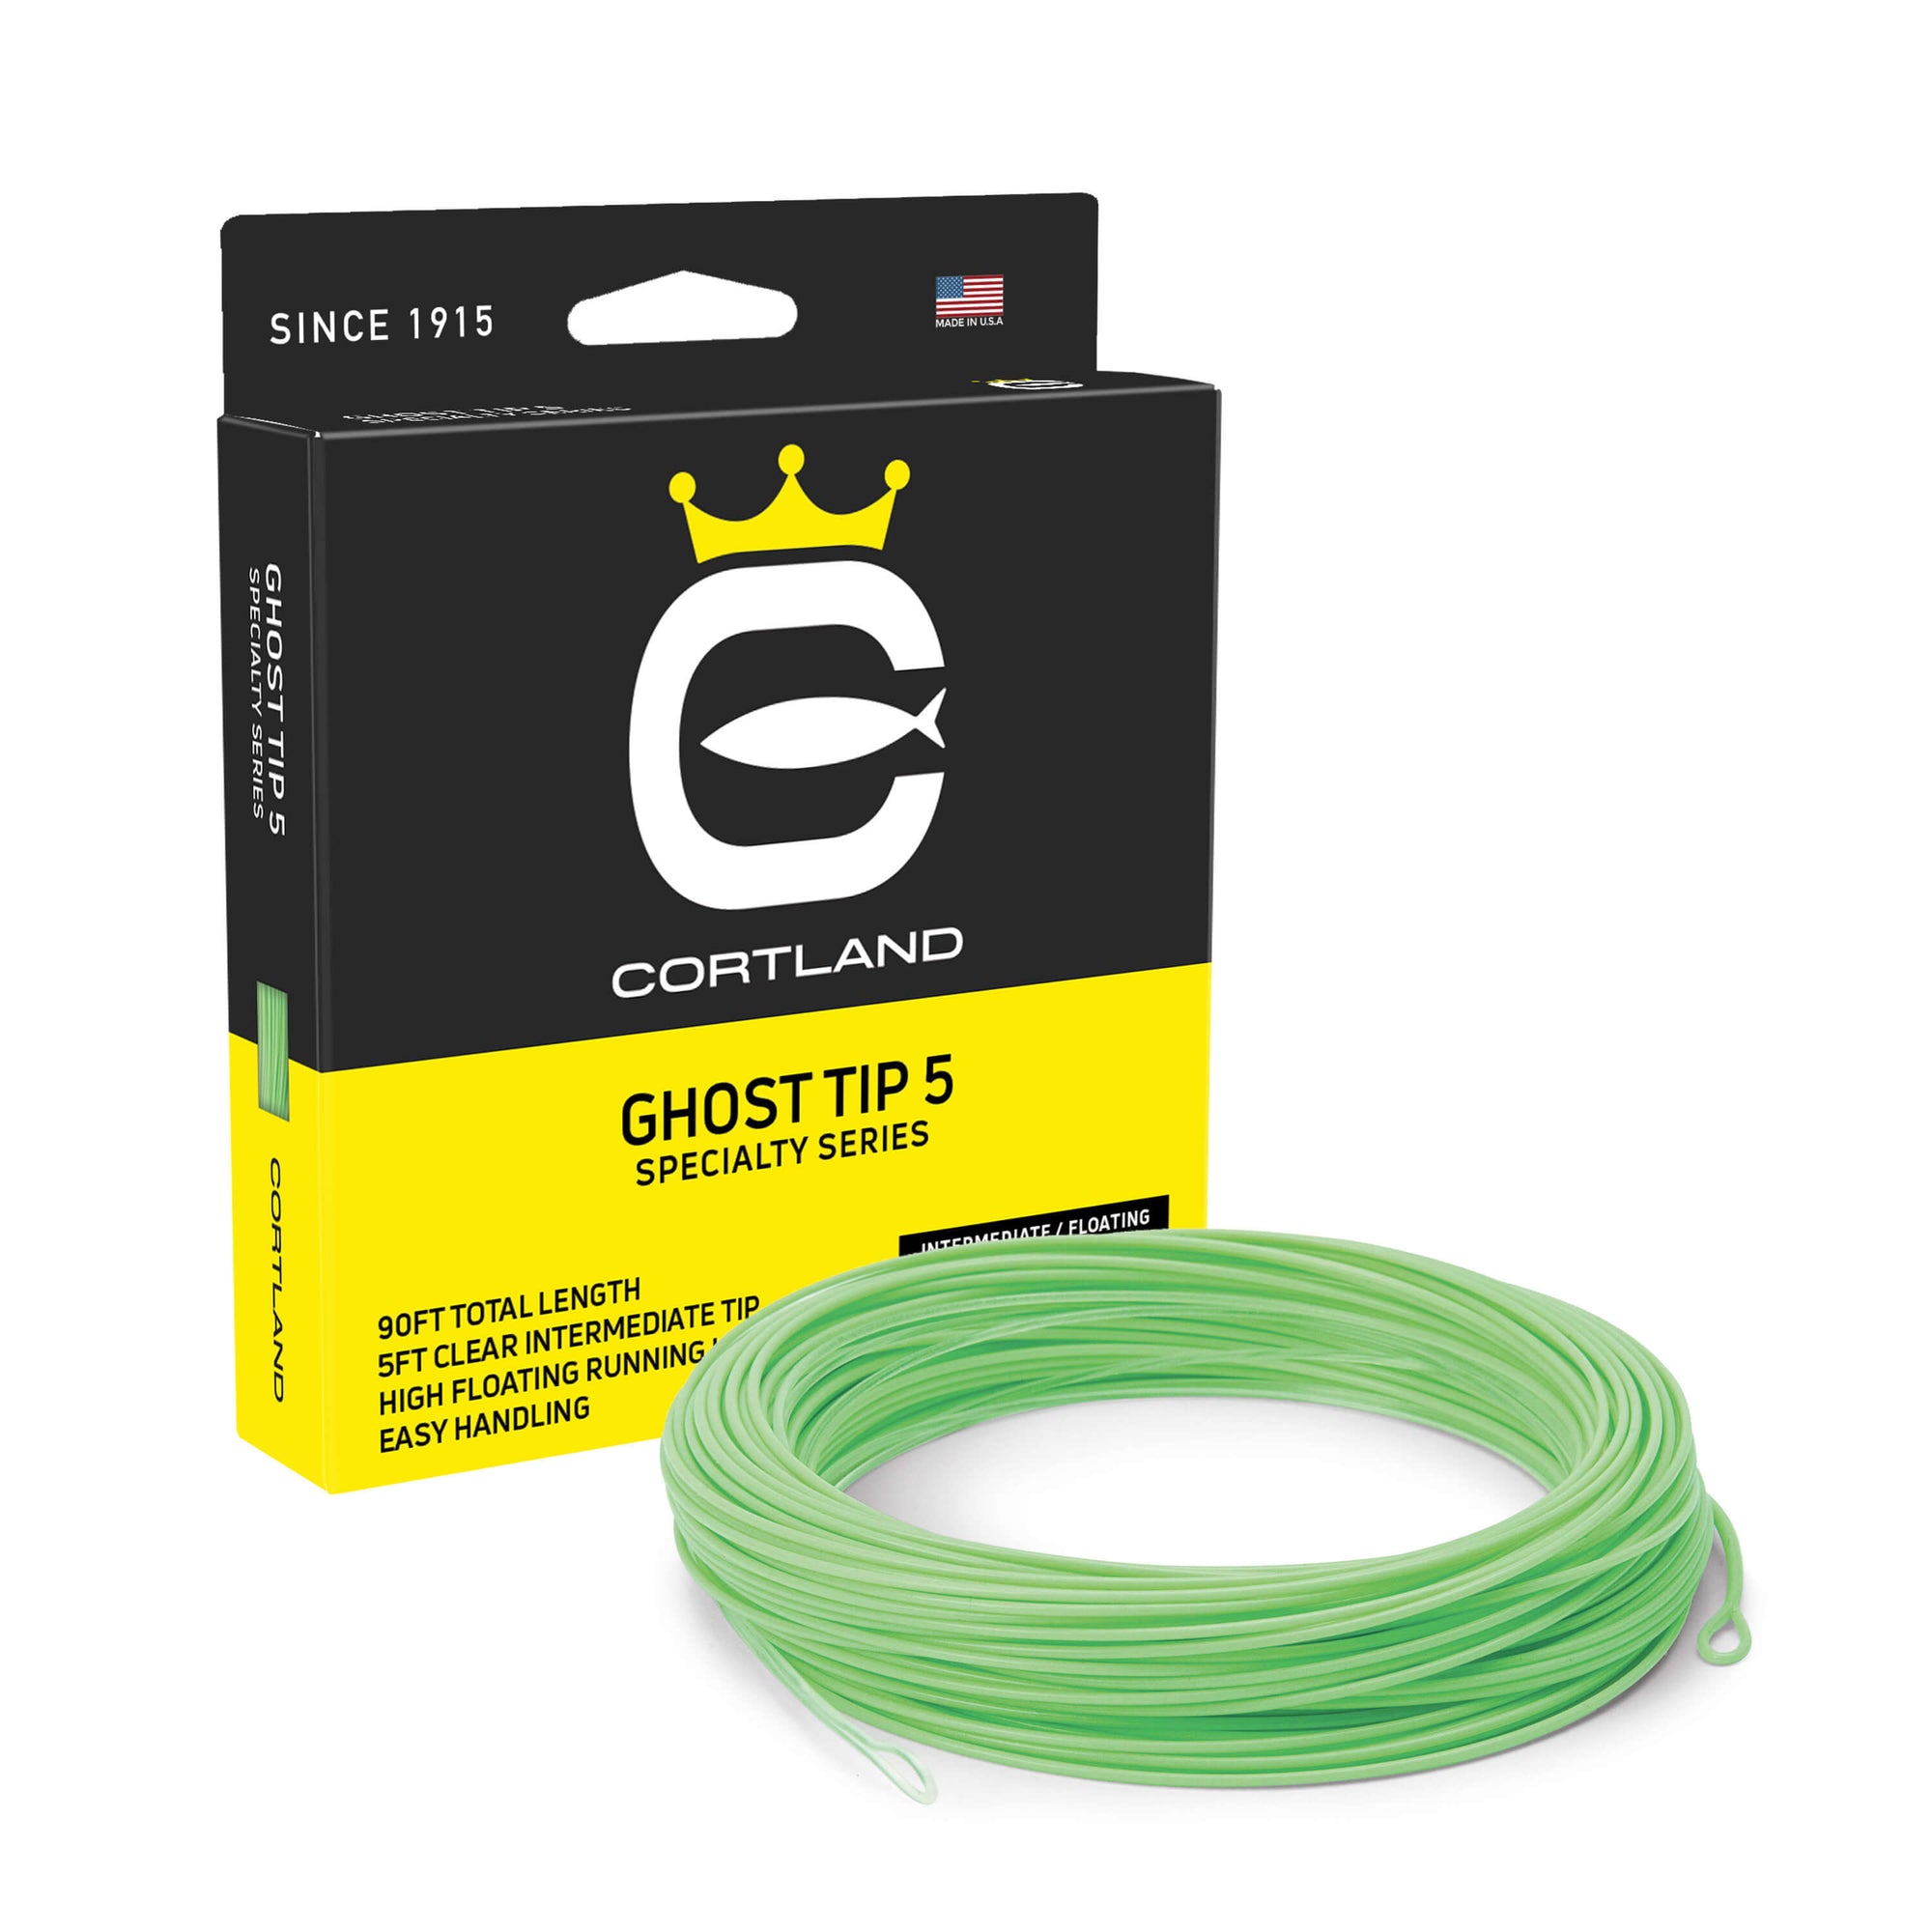 Ghost Tip 5 Fly Line Box and Coil. The coil is clear and mint green. The box is black and yellow. 